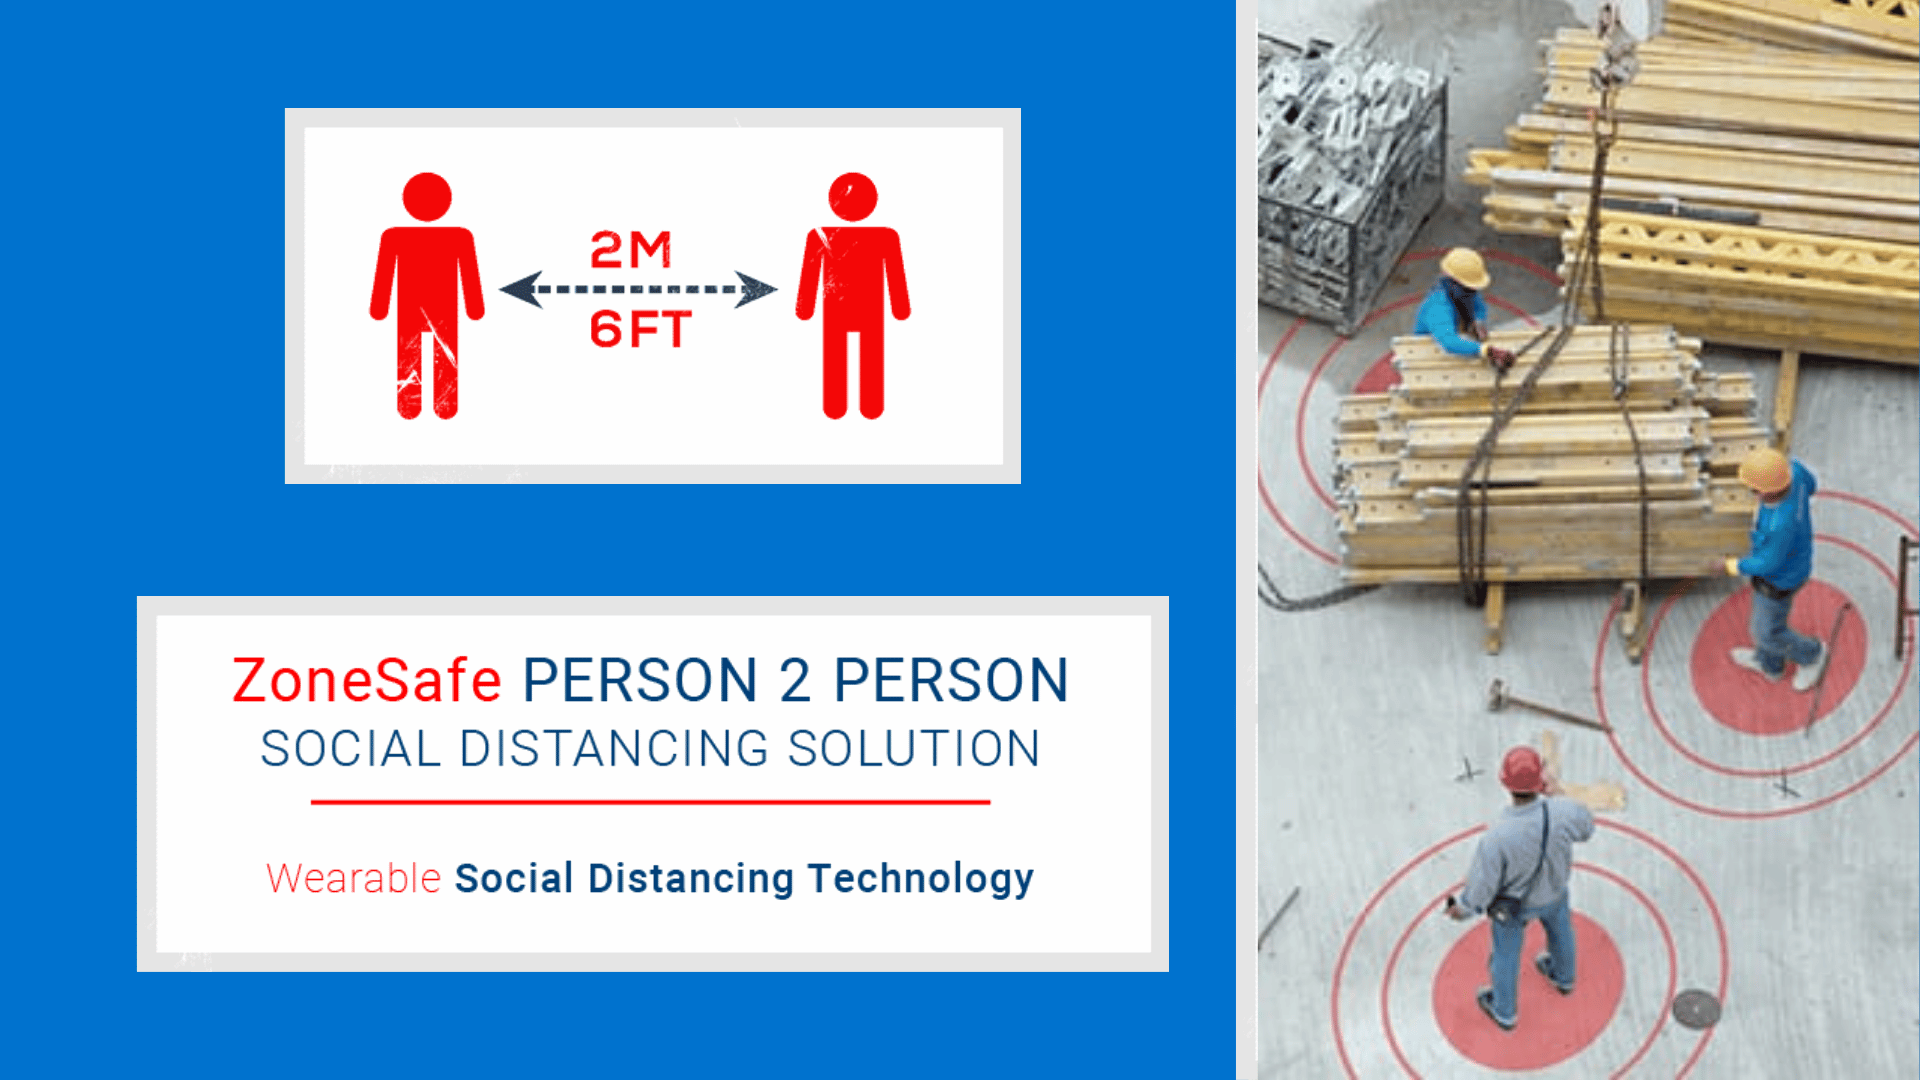 Zone Safe P2 P Social Distancing Solution